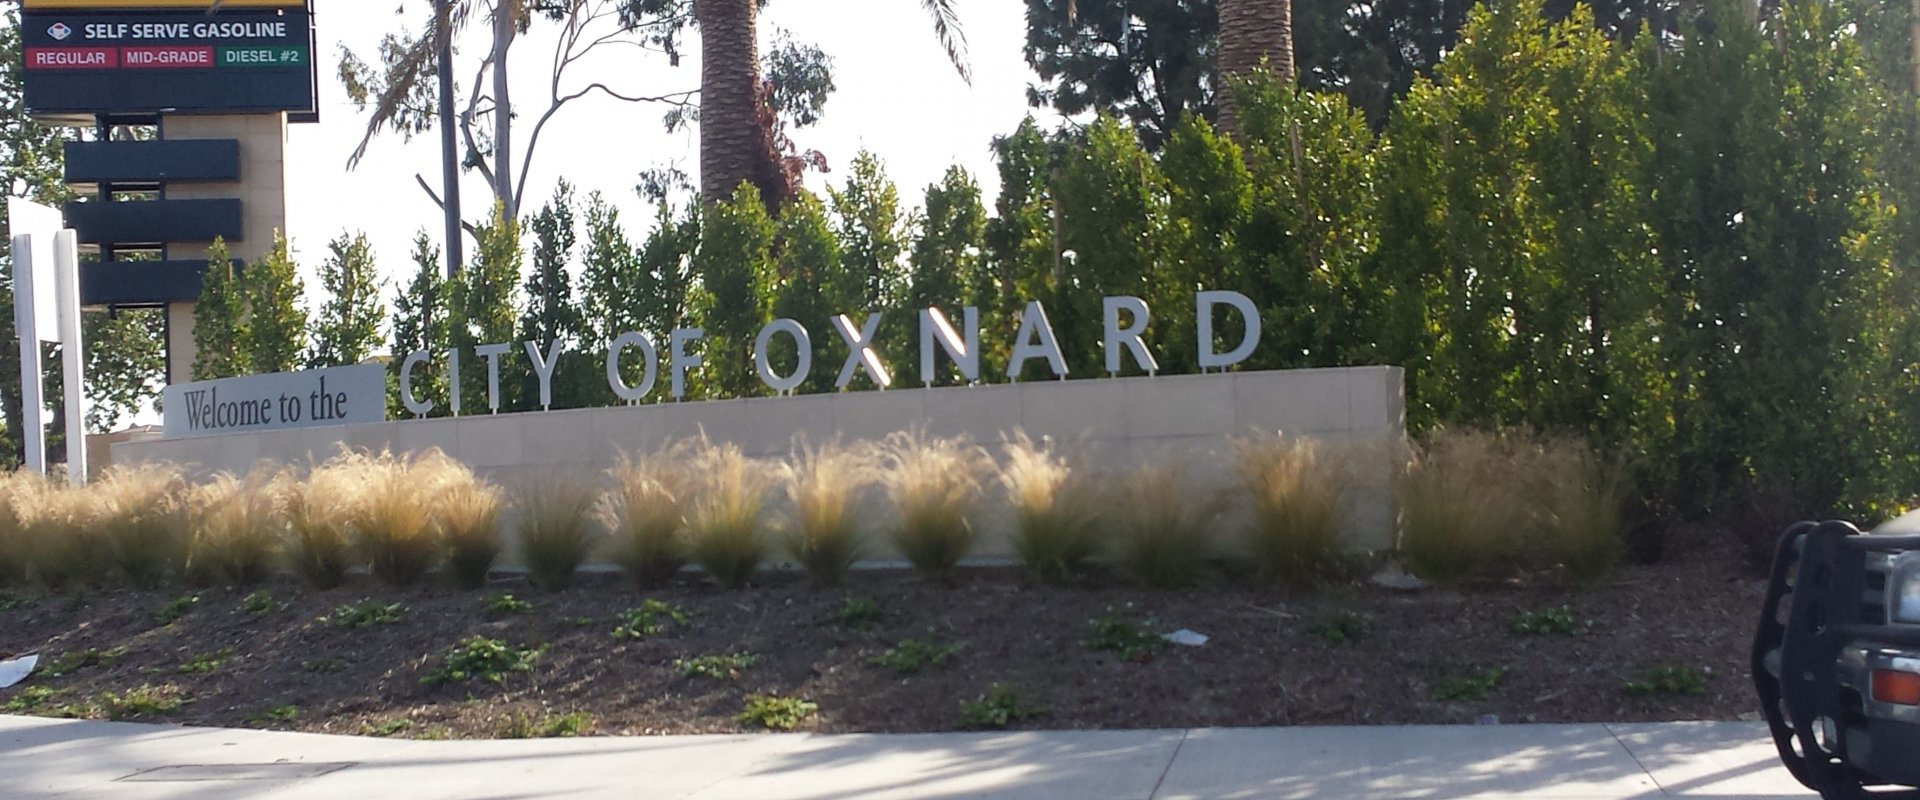 City of oxnard sign located off of Vineyard Ave.